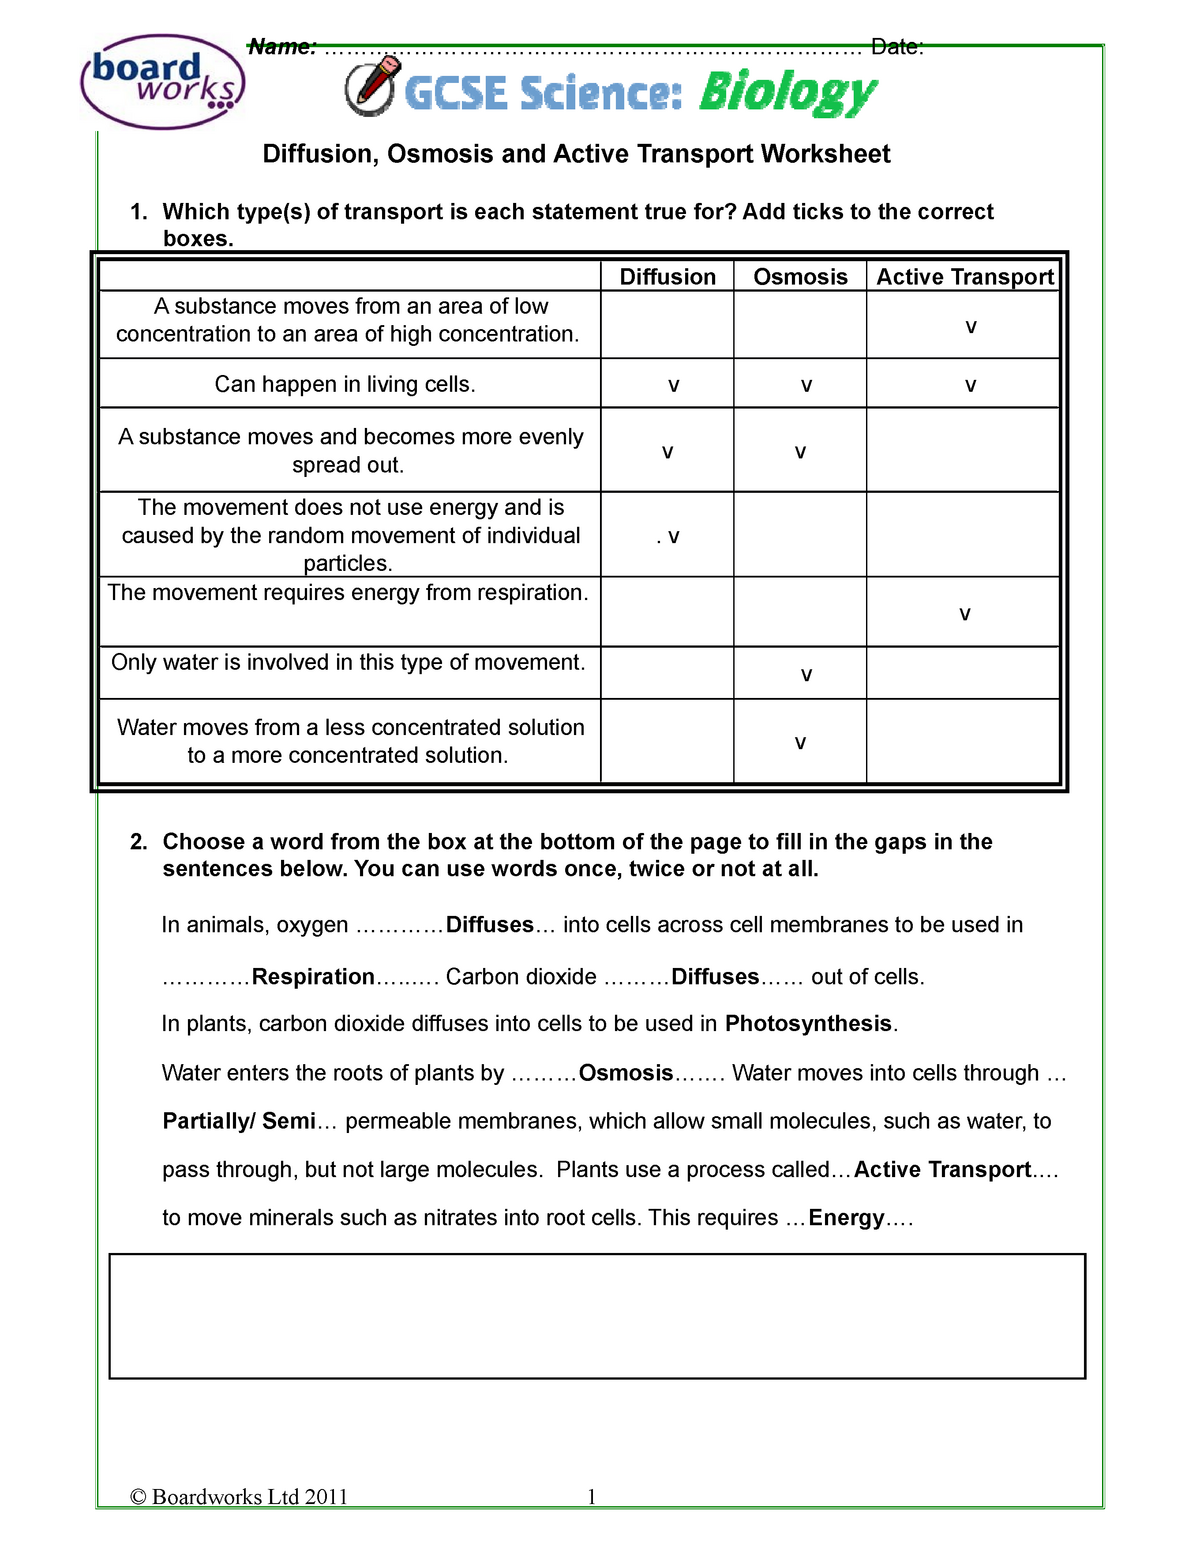 Diffusion Osmosis and Active Transport Worksheet F21 - BP 21 For Transport In Cells Worksheet Answers